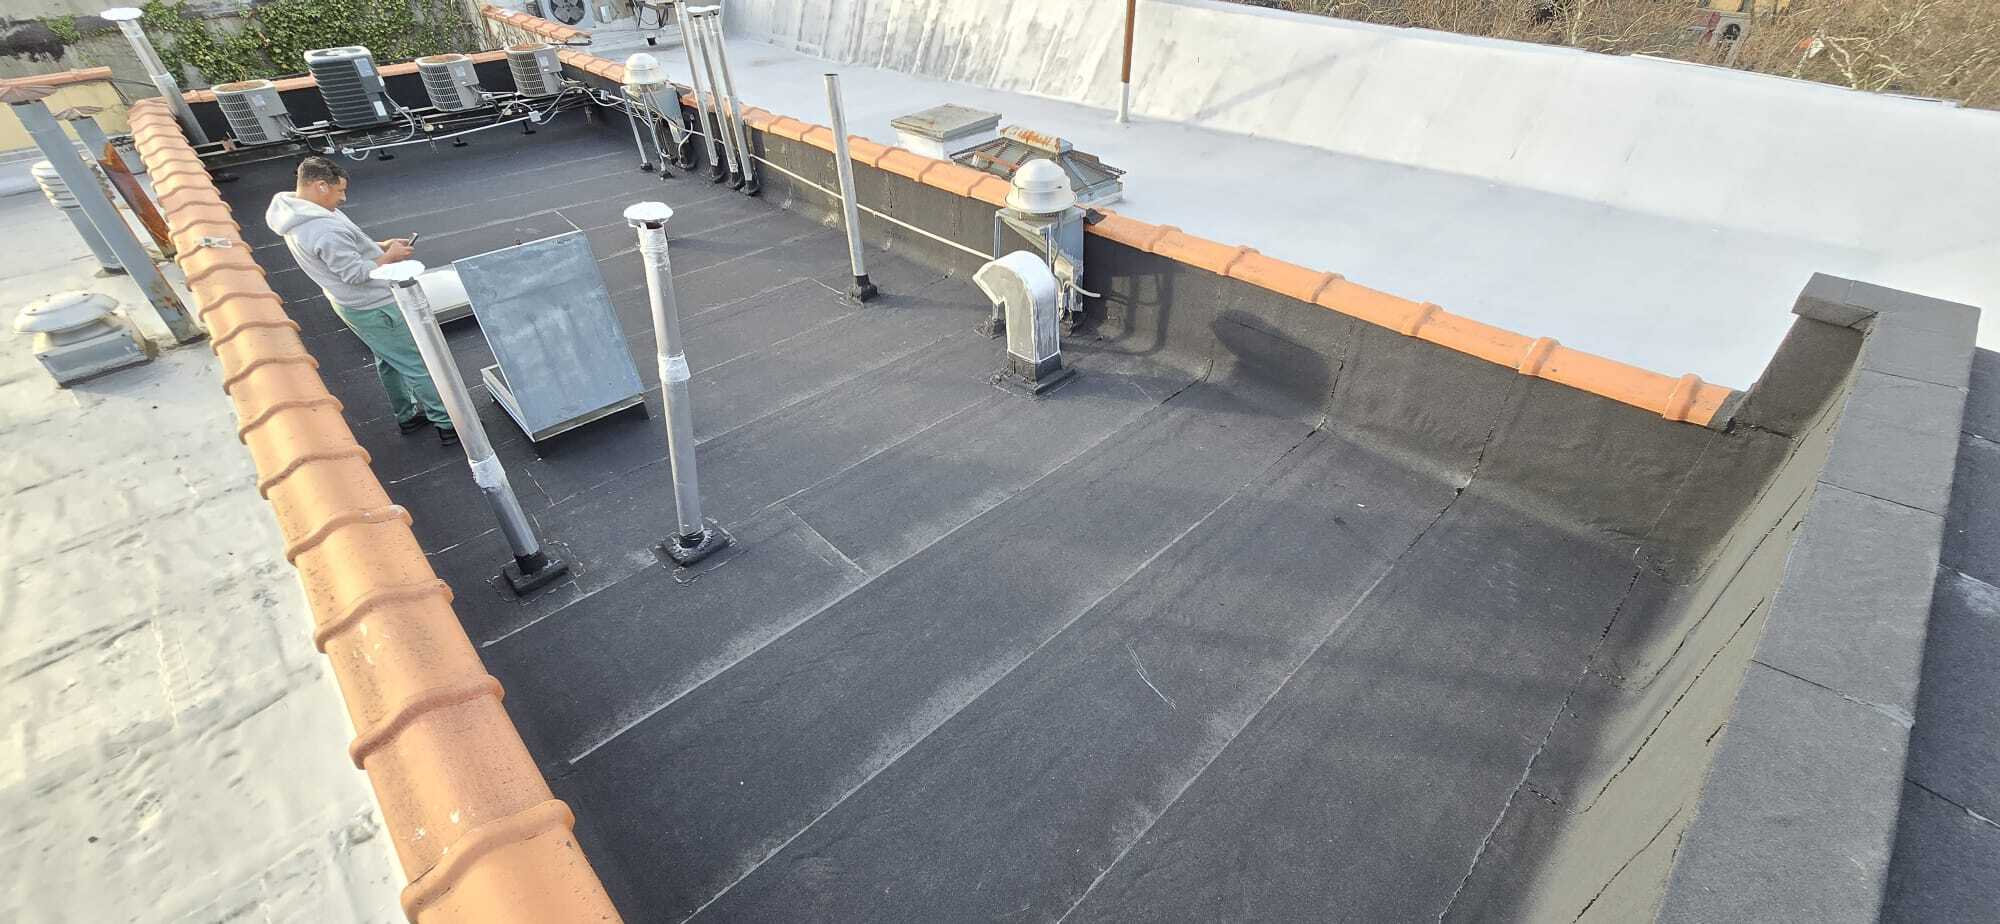 New Flat Roof Installation & Inspection in the Bronx Project Shot 1